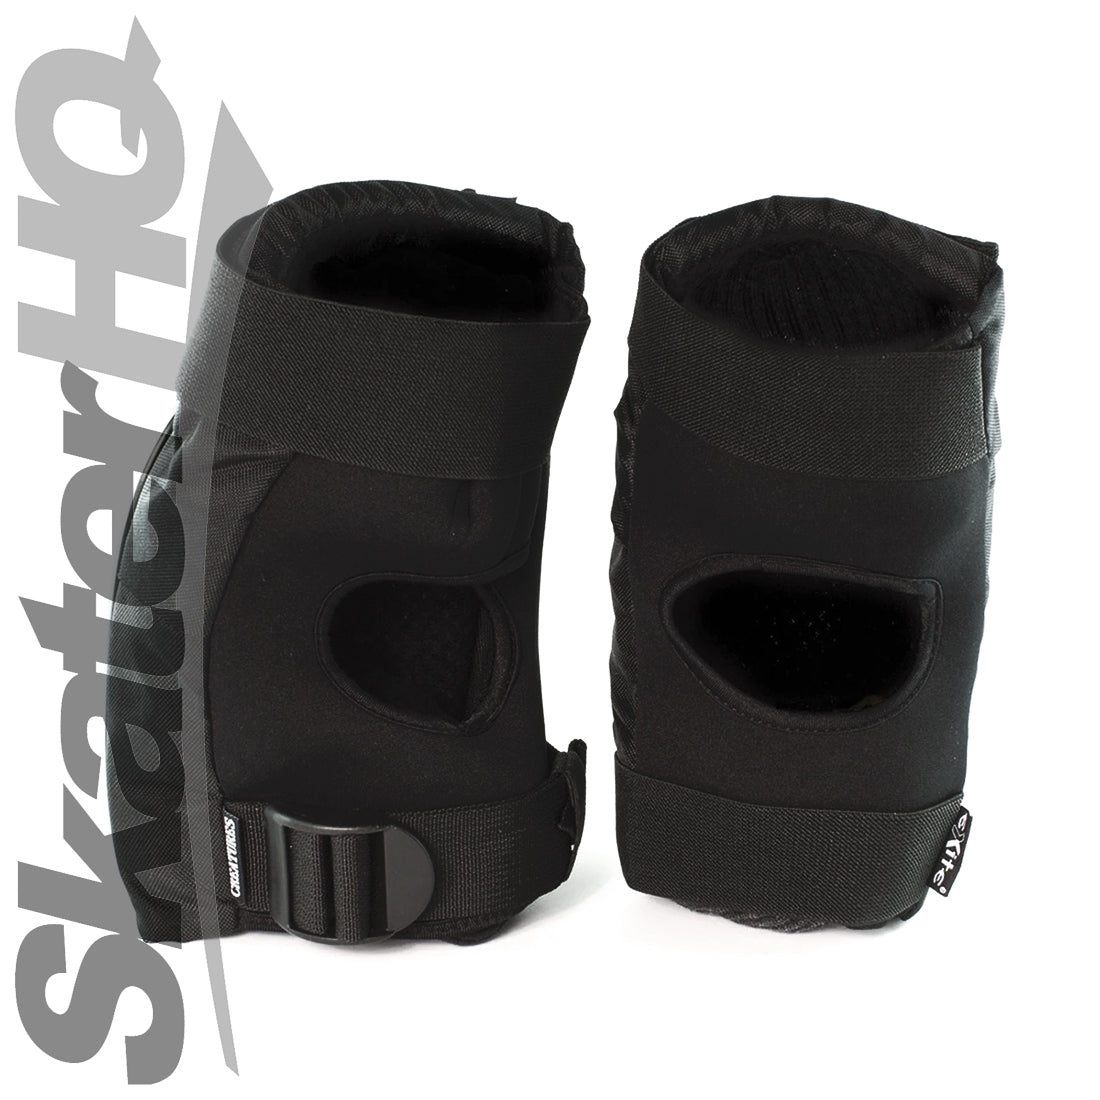 Exite Creatures 2-Pack - Black - Adult Large Protective Gear